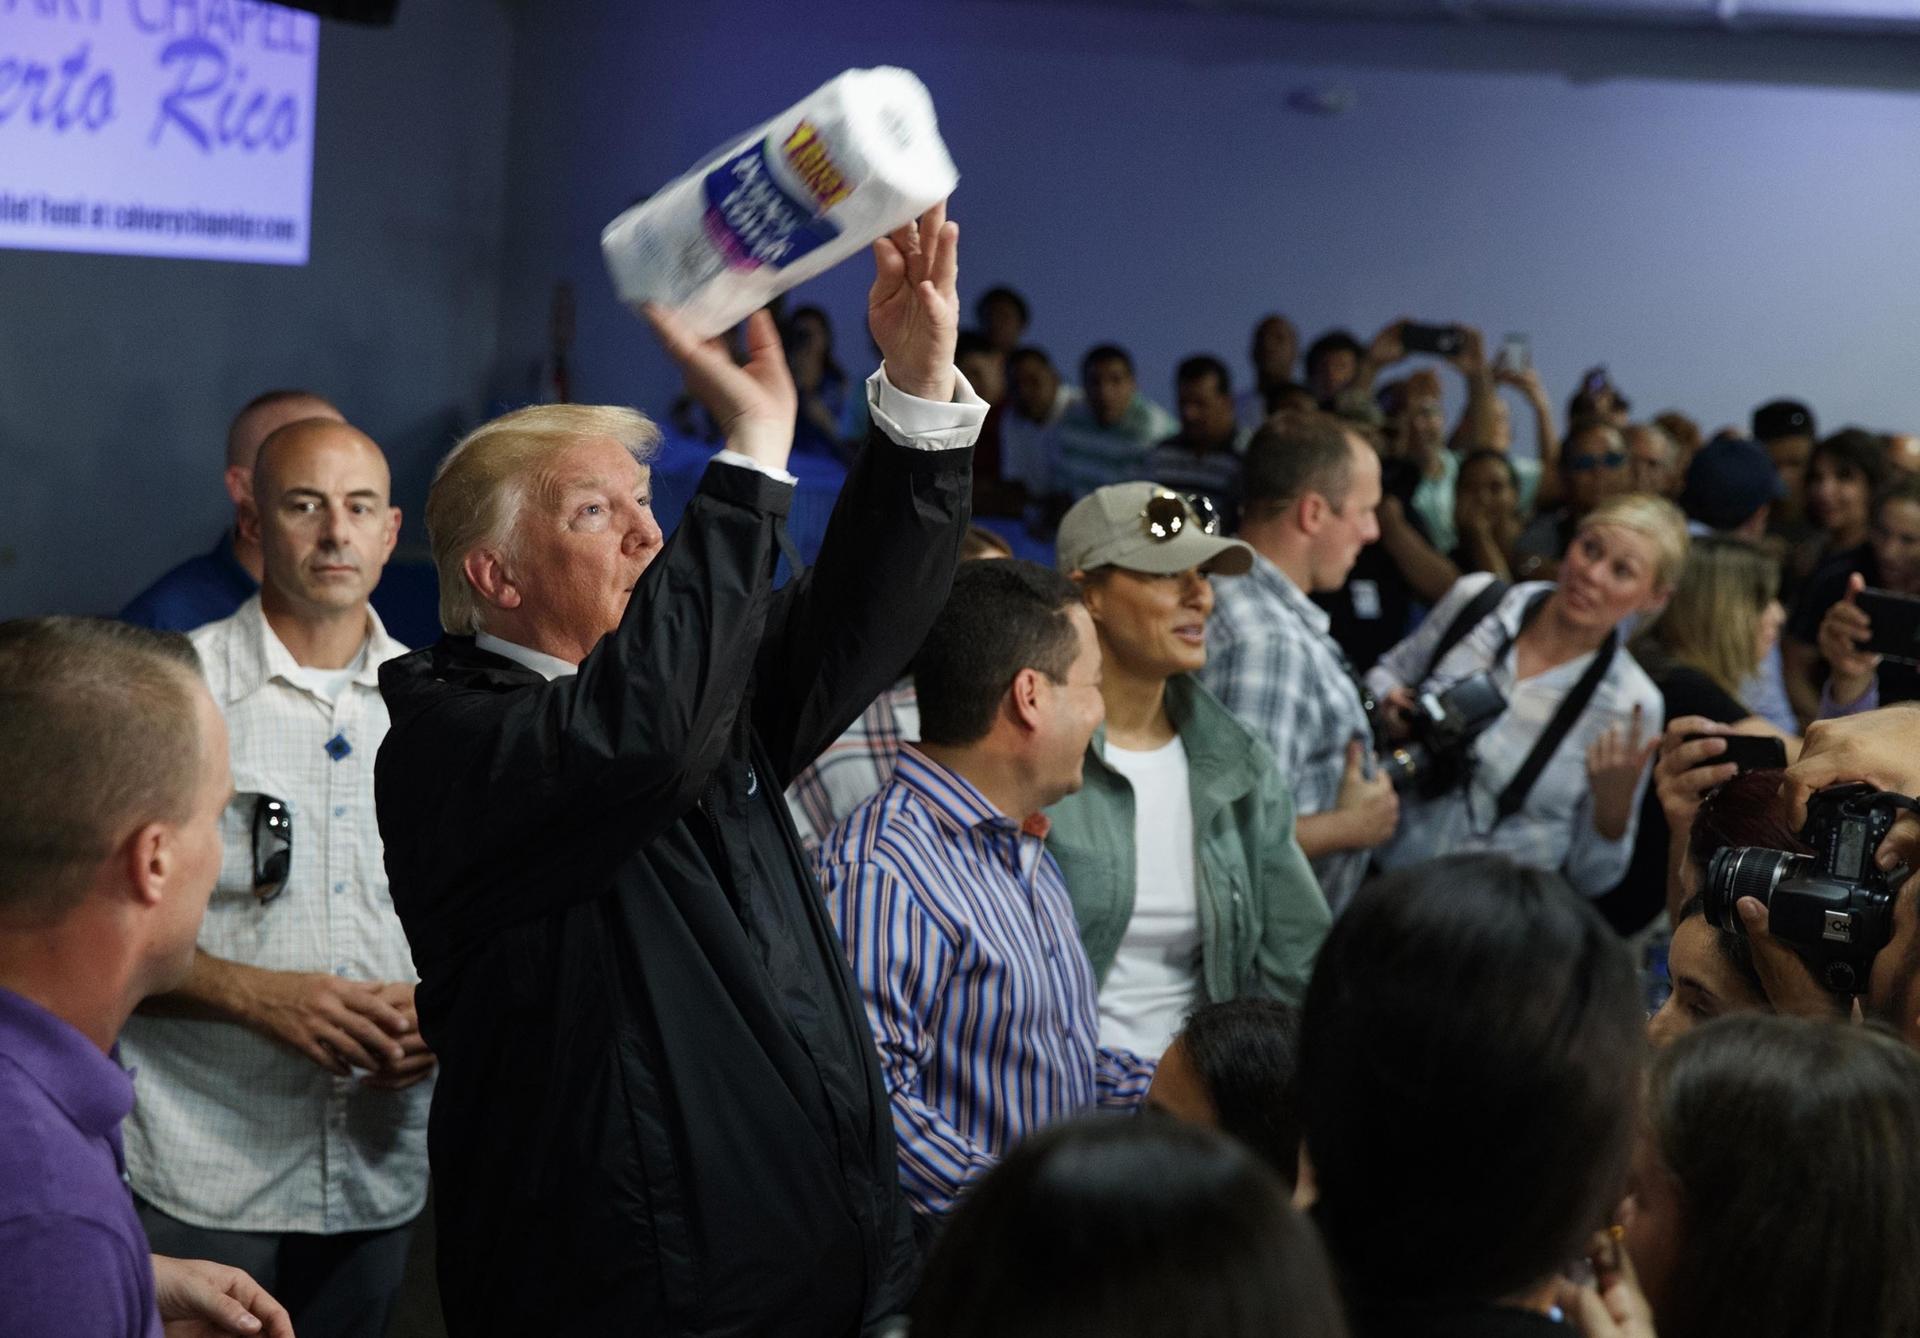 A man wearing a black suit throws a roll of paper towels to people in front of him to catch.